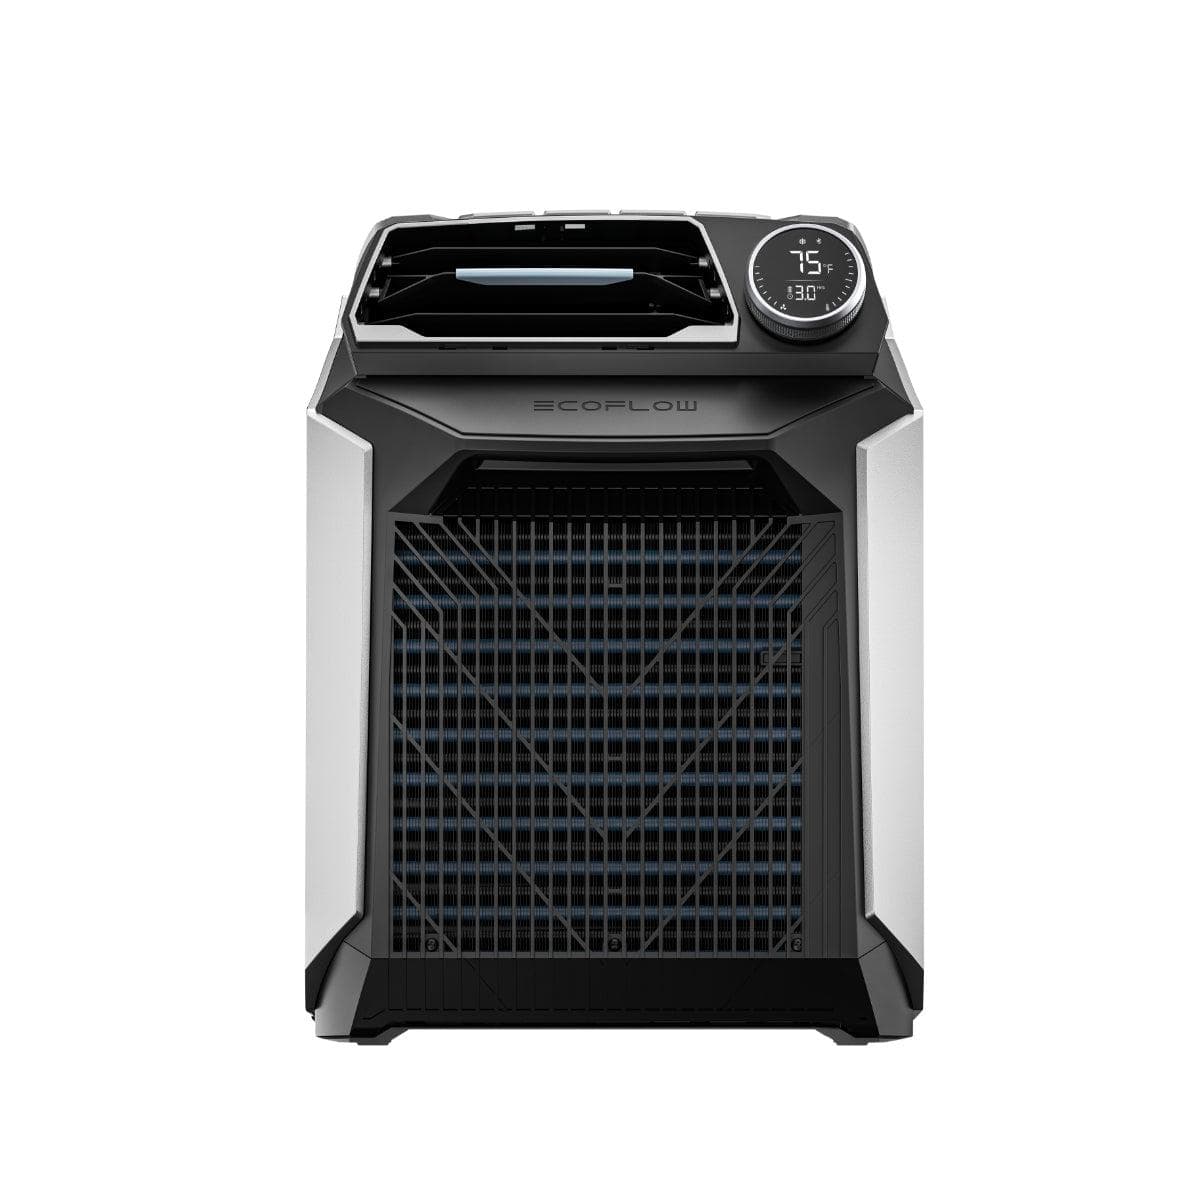 EcoFlow Delta Pro 3600Wh + 1x Wave Portable Air Conditioner Power Station Kit